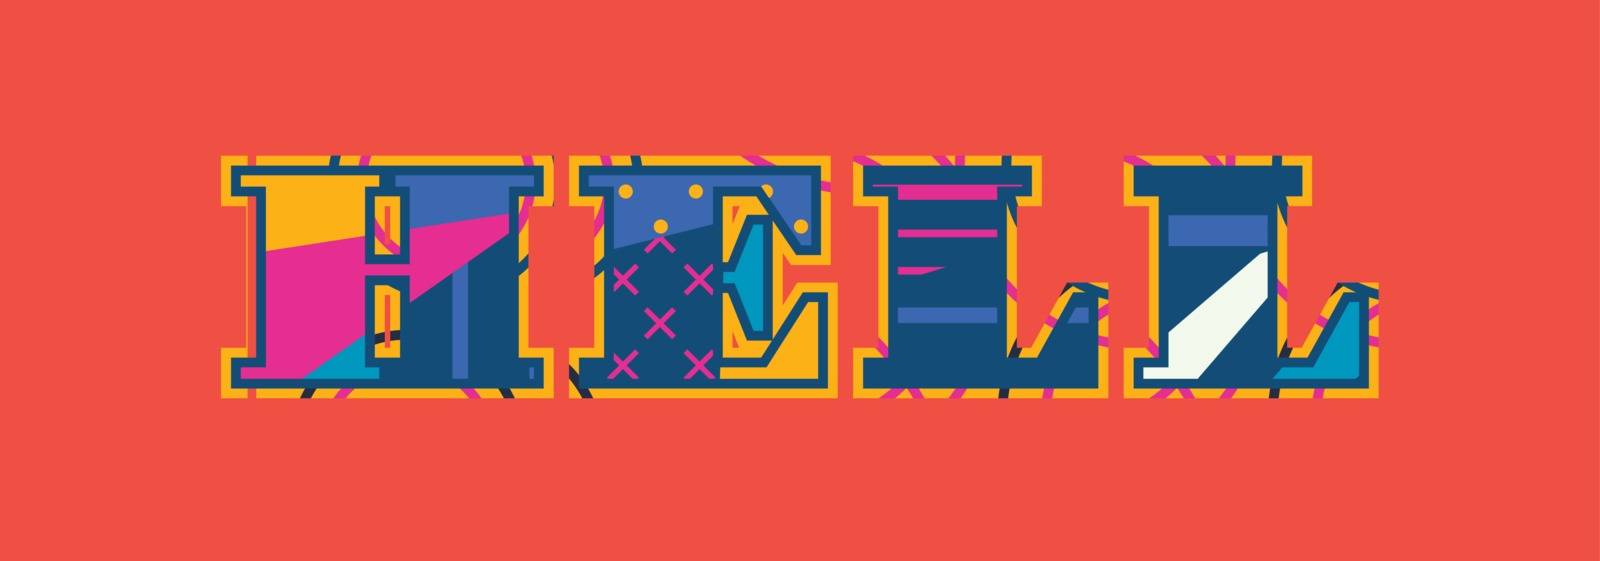 The word HELL concept written in colorful abstract typography. Vector EPS 10 available.